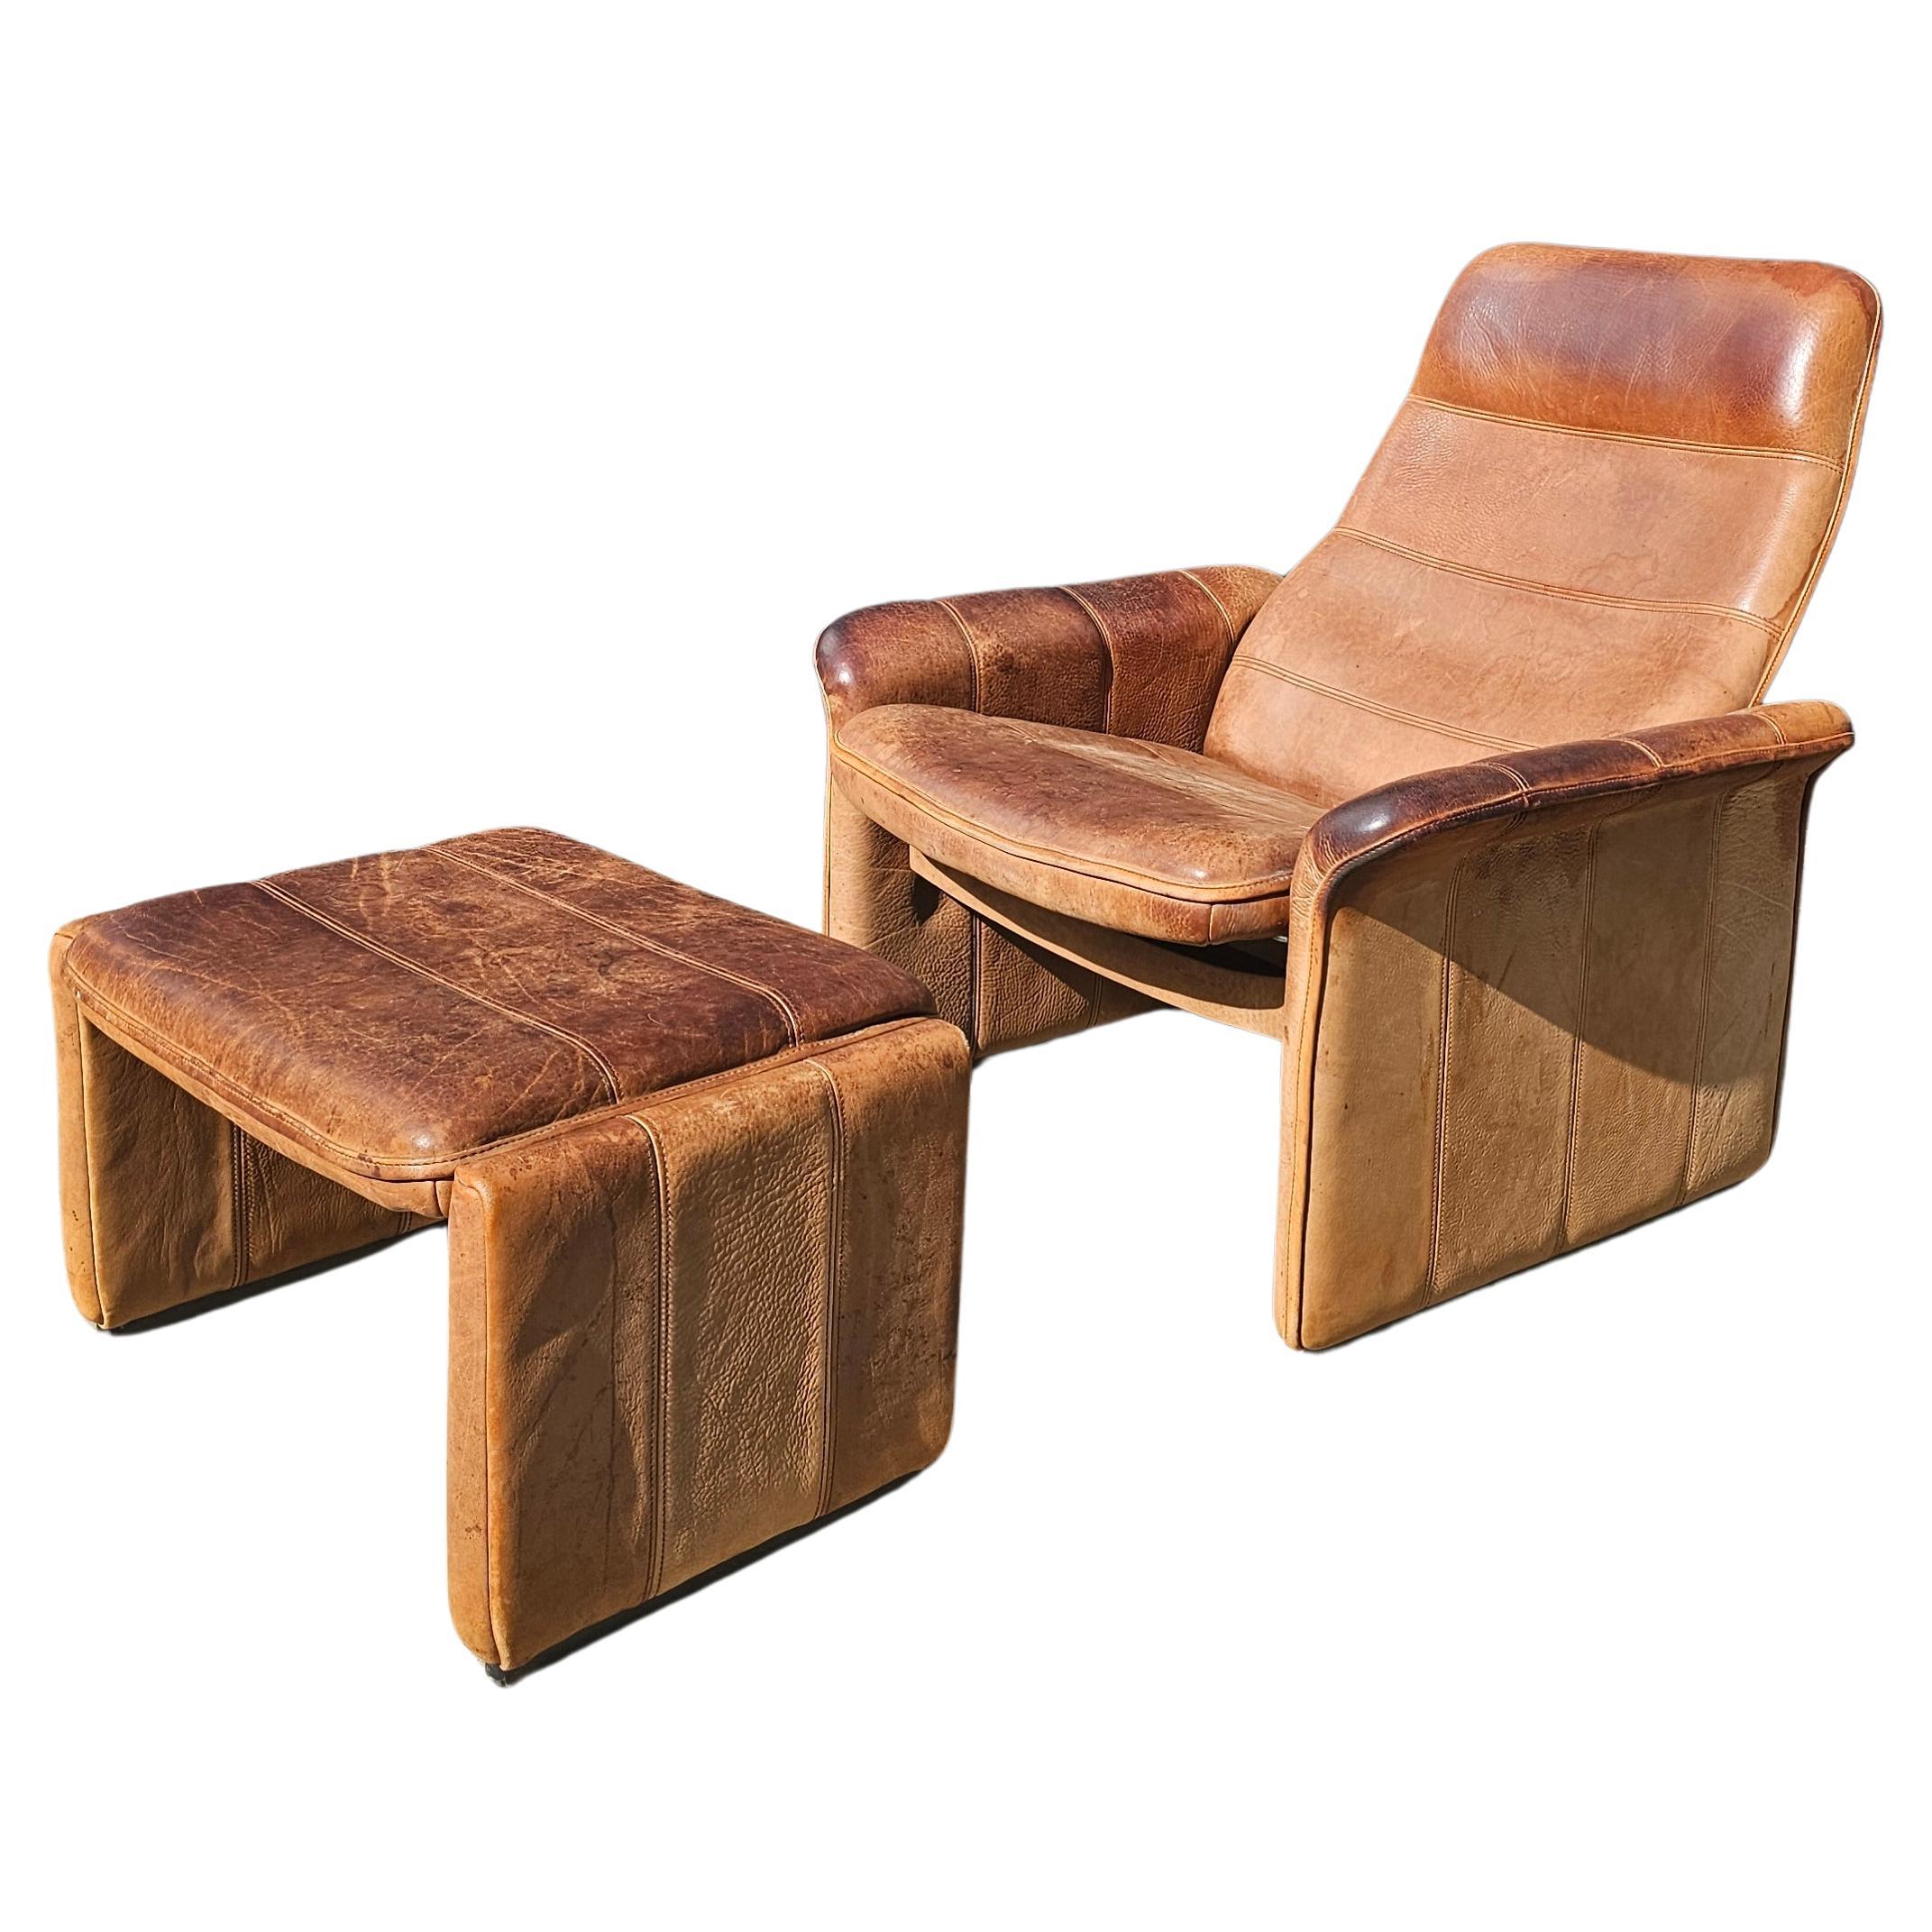 DS 50 Buffalo Neck Leather Lounge Chair & Footstool by De Sede, 1970s For Sale